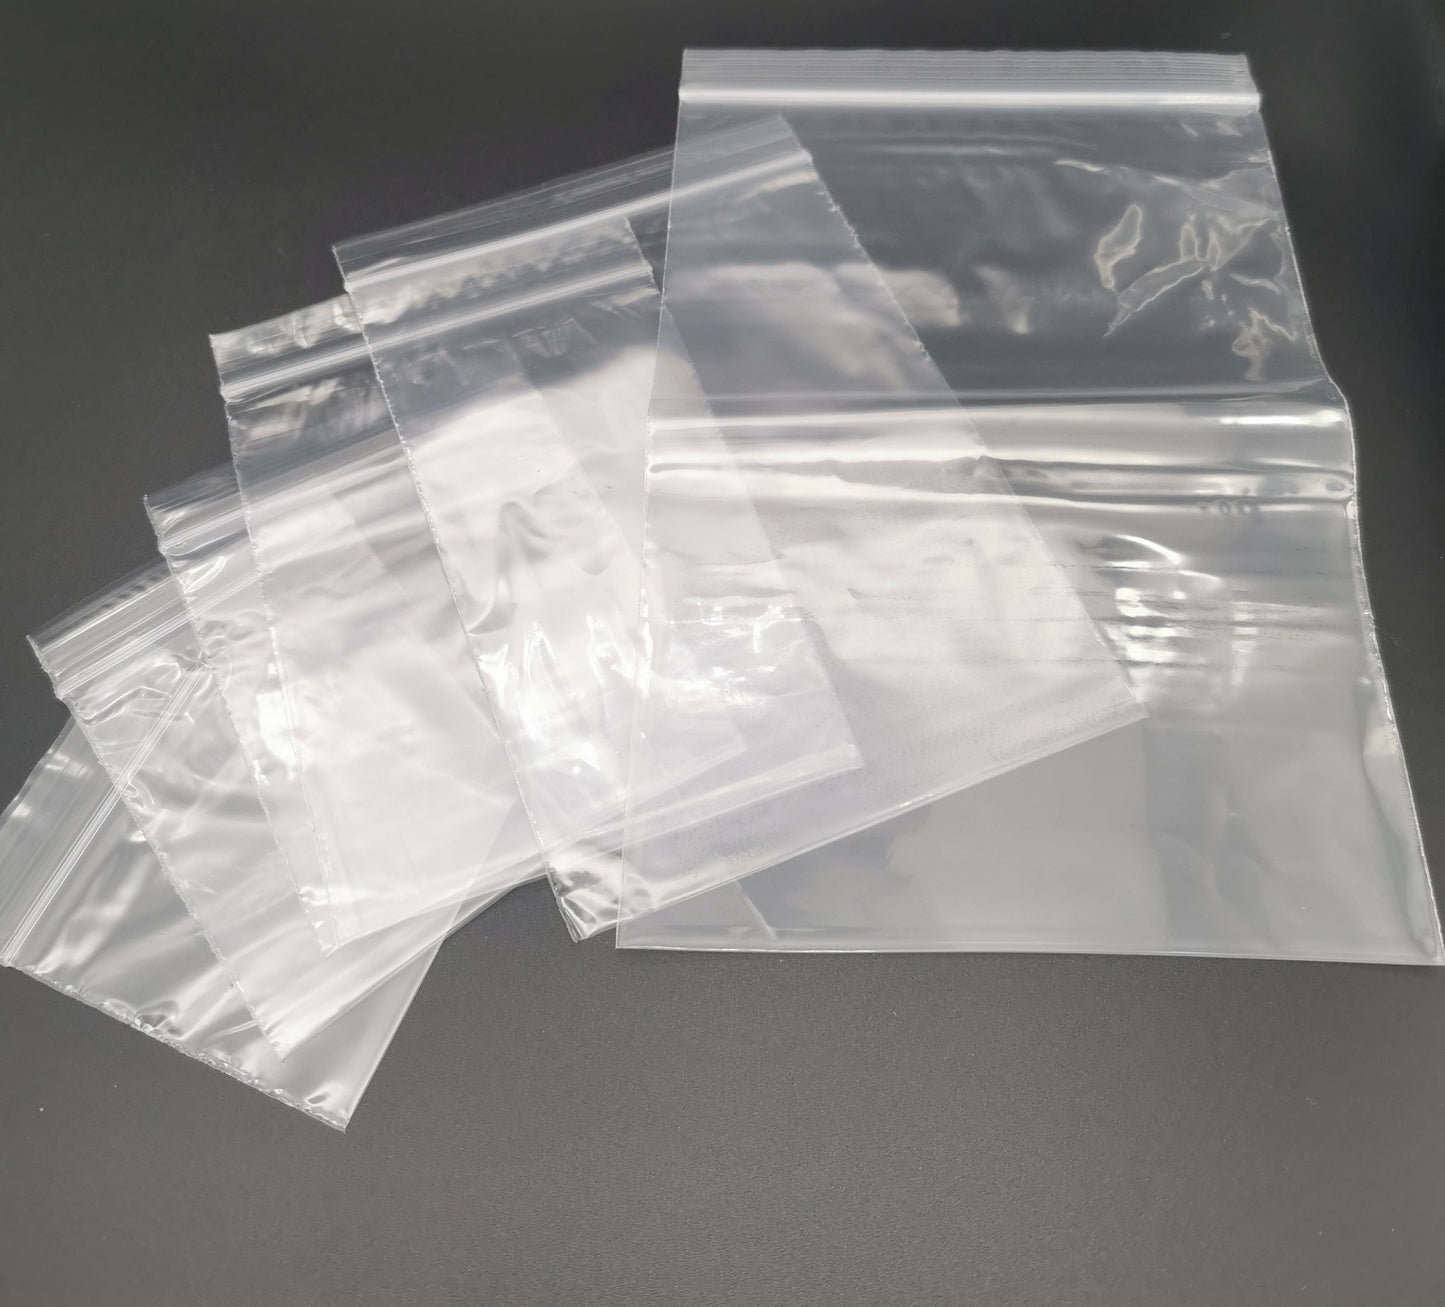 1000 Wholesale Clear Plastic Bags Self Seal Resealable Bags - All Sizes -Bulk